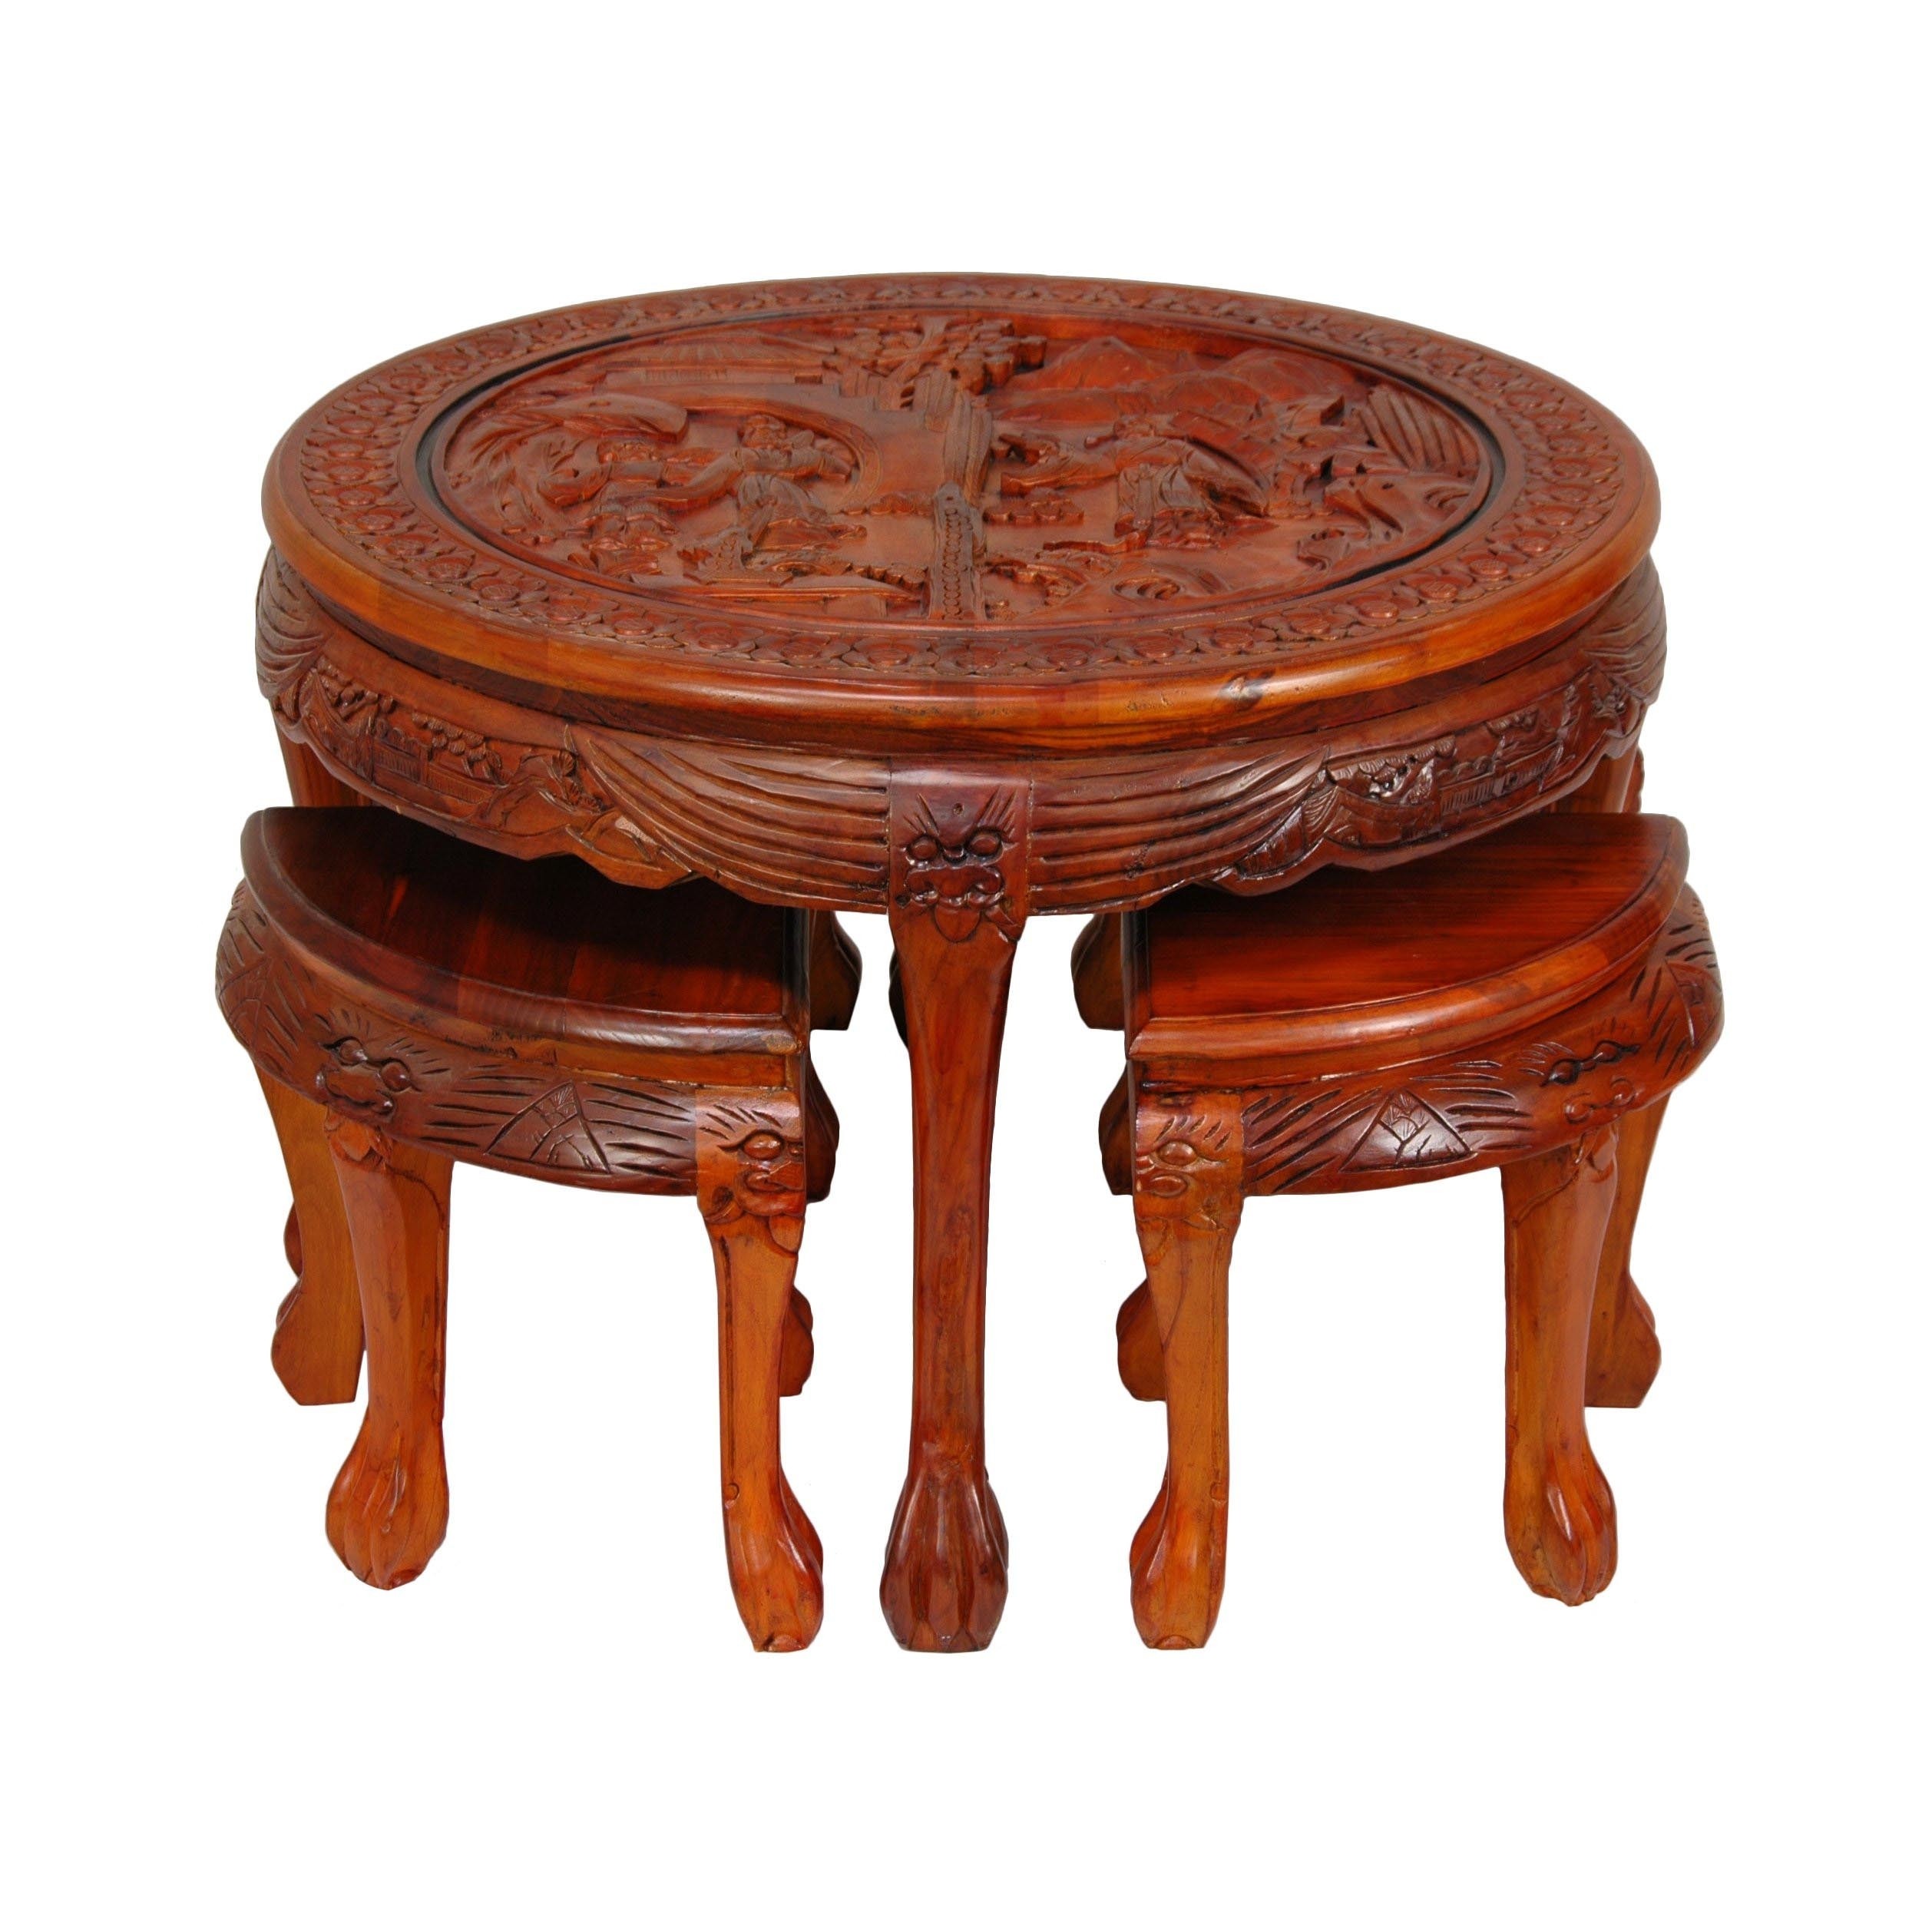 Carved Circular Coffee Table with Stool